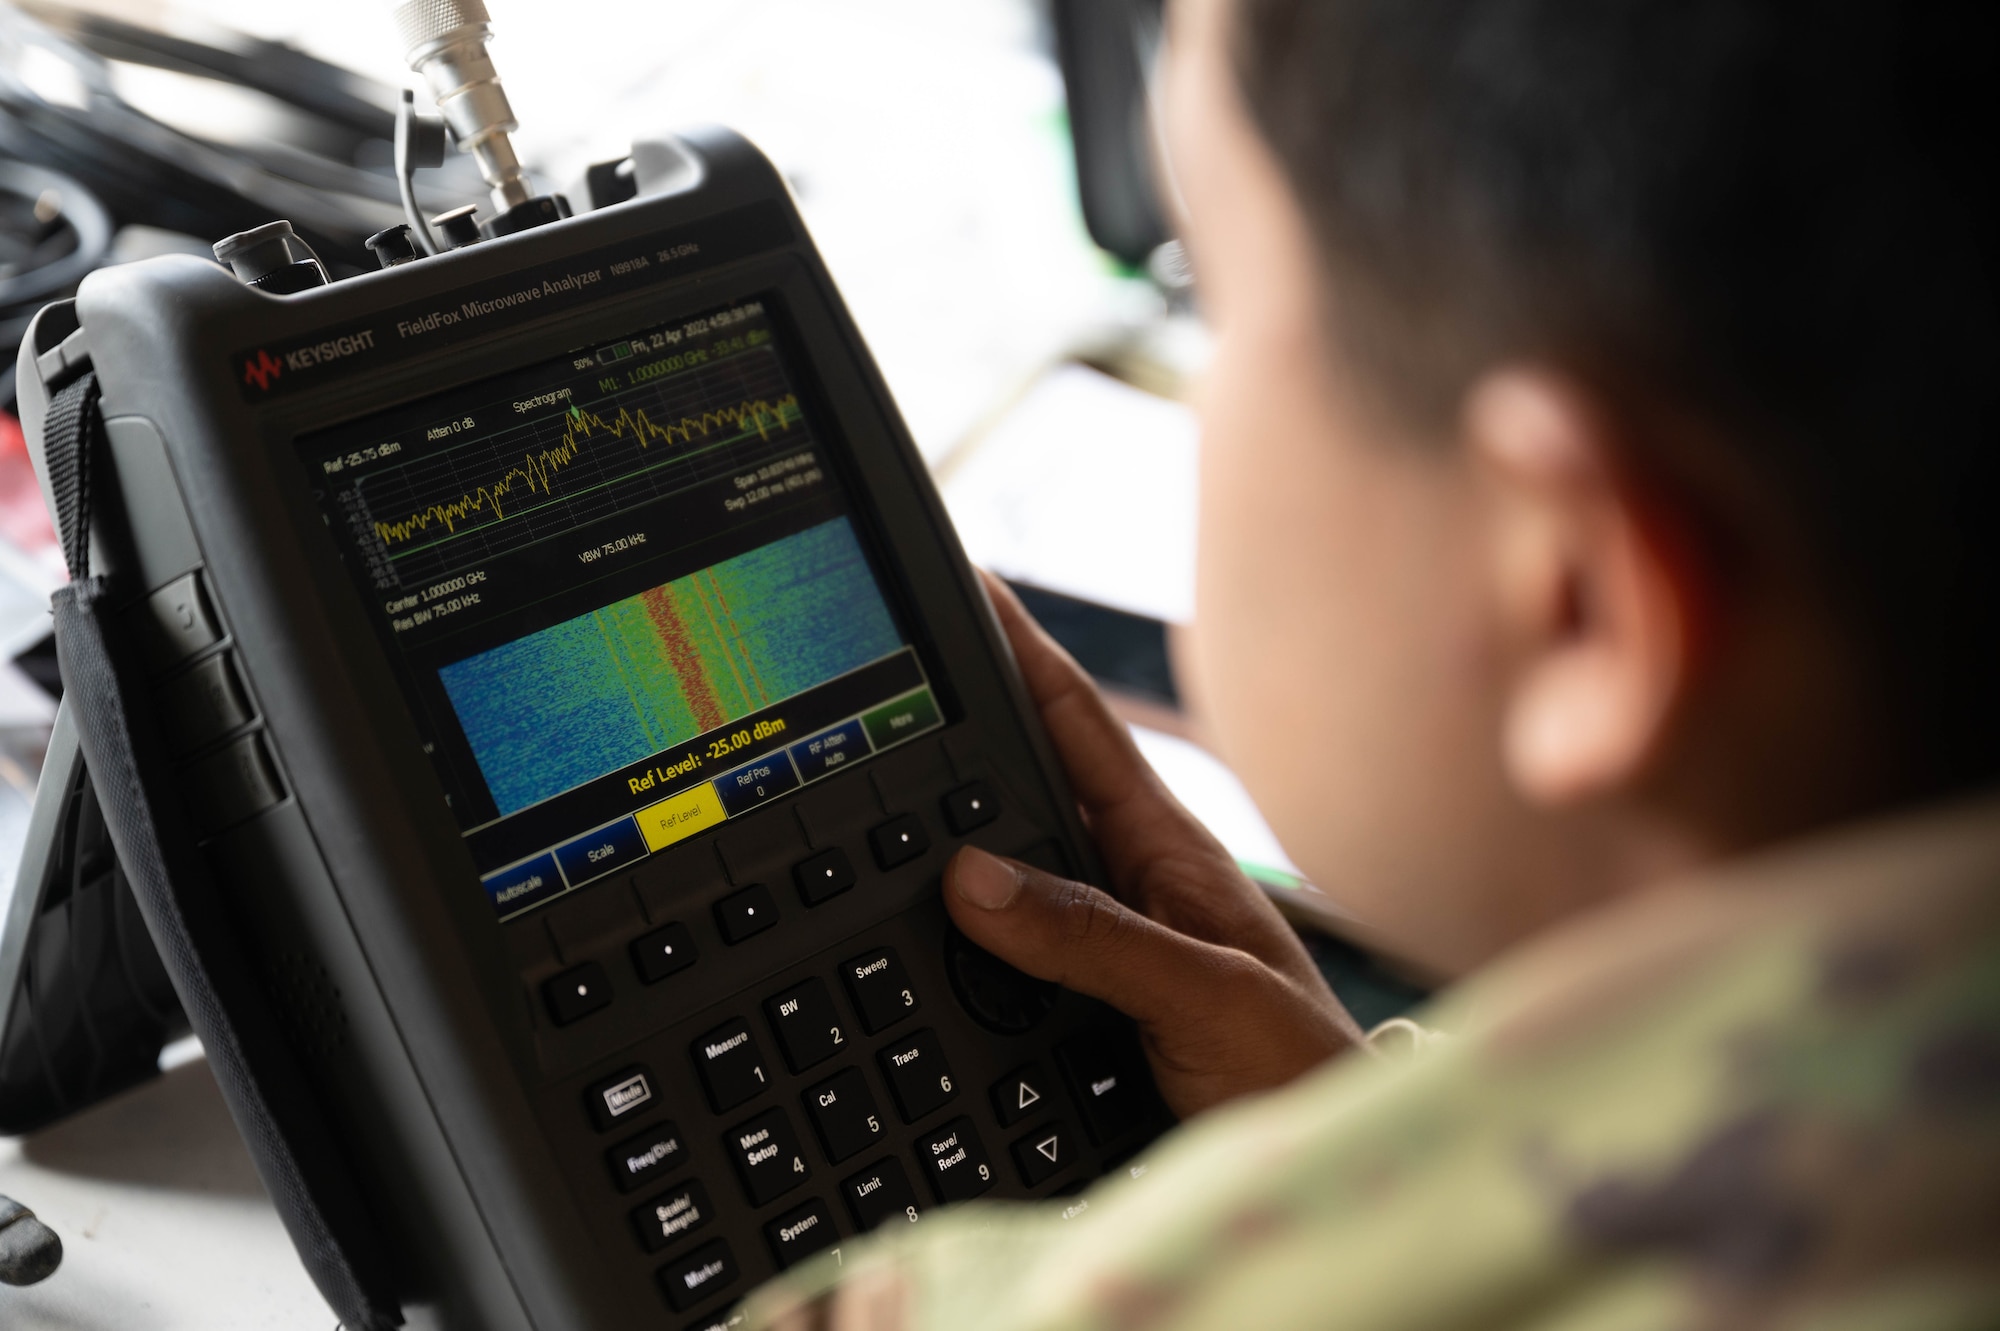 U.S. Army soldier uses devices to receive satellite transmissions.